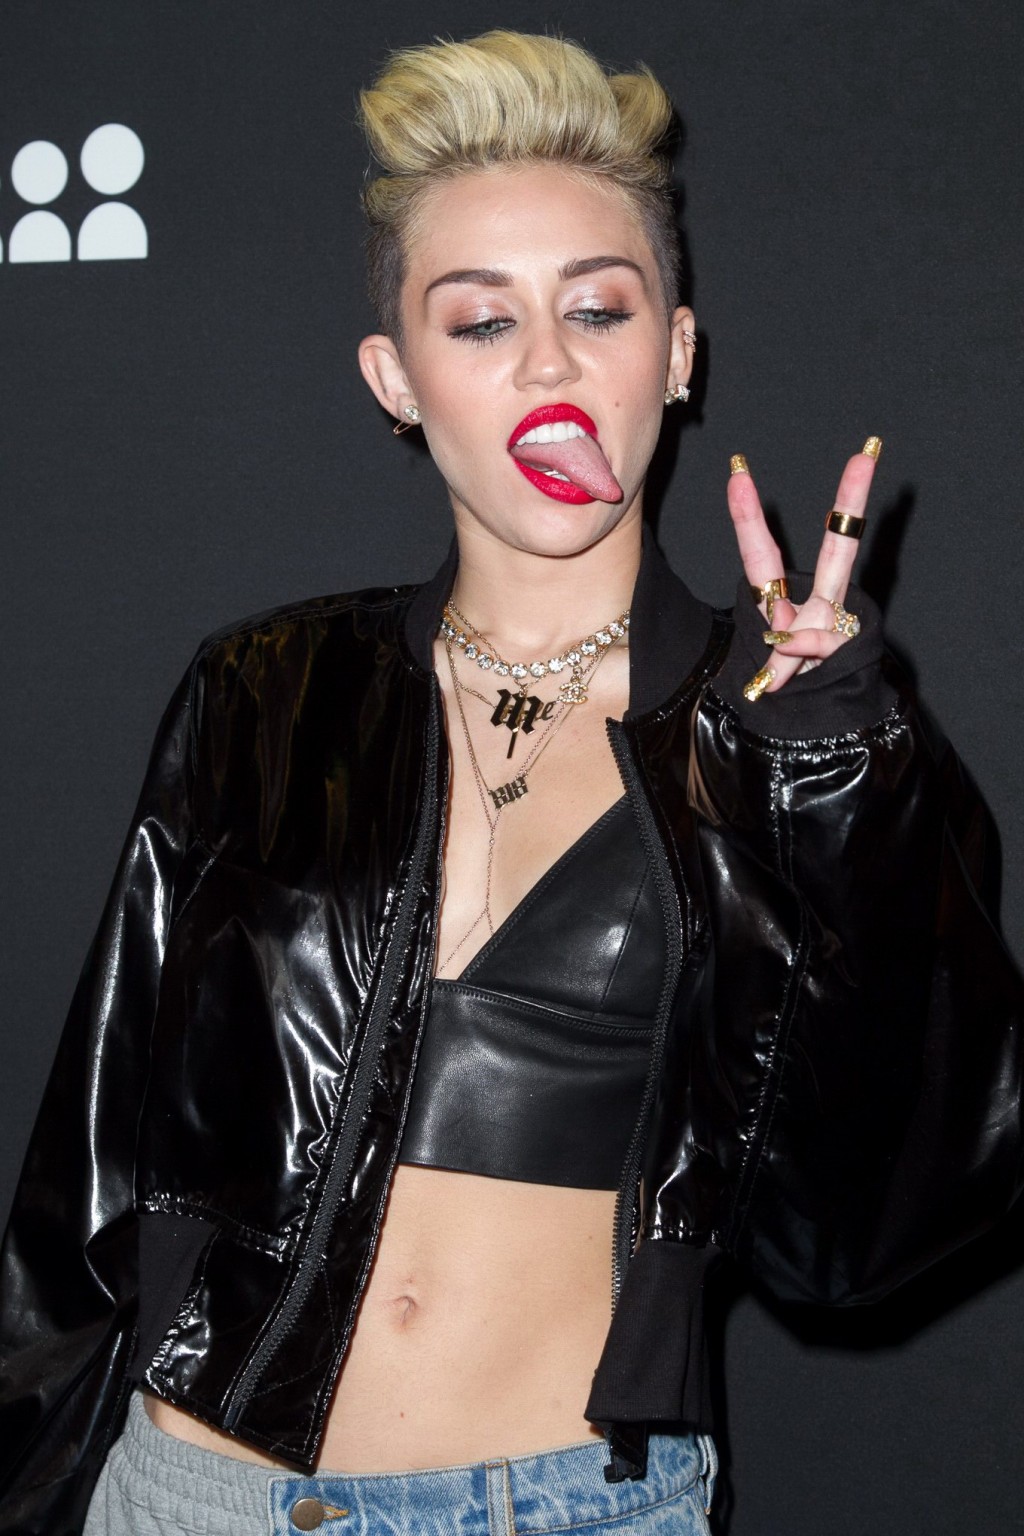 Miley Cyrus wearing a leather crop top at the Myspace launch event #75228697